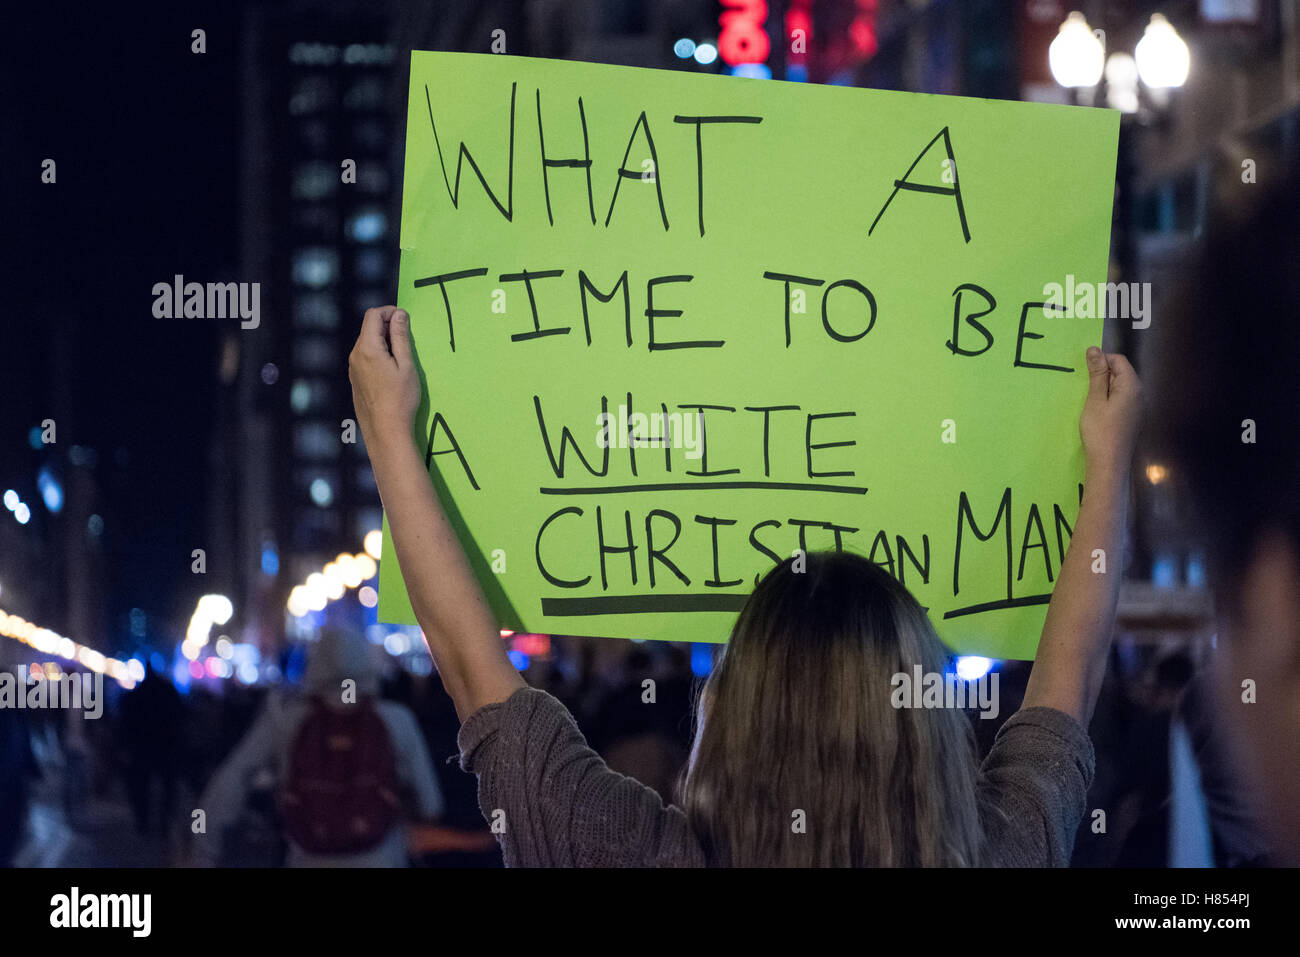 Chicago, Illinois, USA. 9th November, 2016. Anti Trump protester in Chicago holding a sign reading 'What a time to be a White Christian Man' Credit:  Caleb Hughes/Alamy Live News. Stock Photo